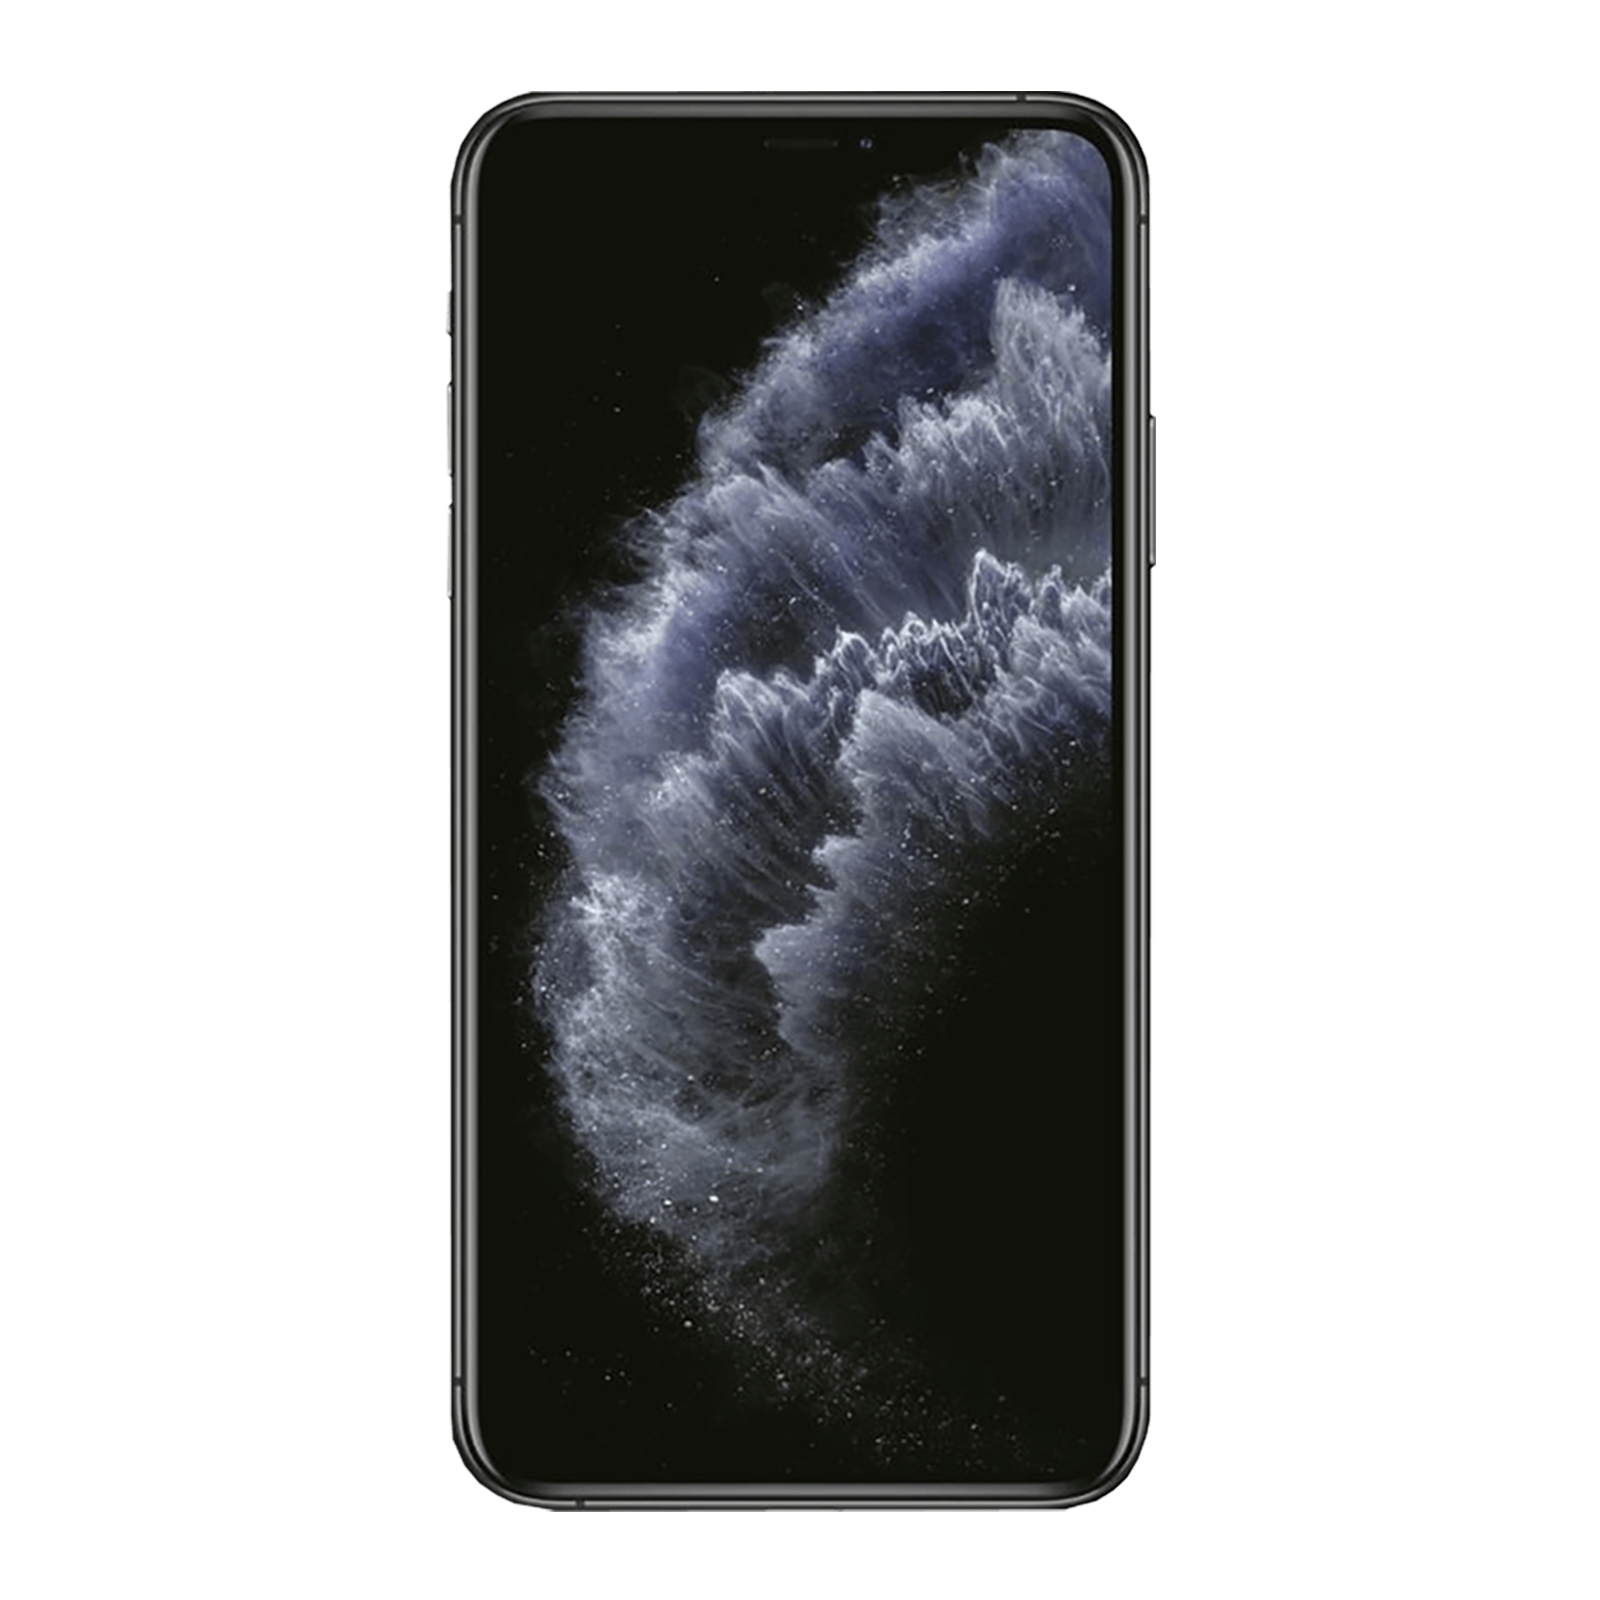 Up to 70% off Certified Refurbished iPhone 11 Pro